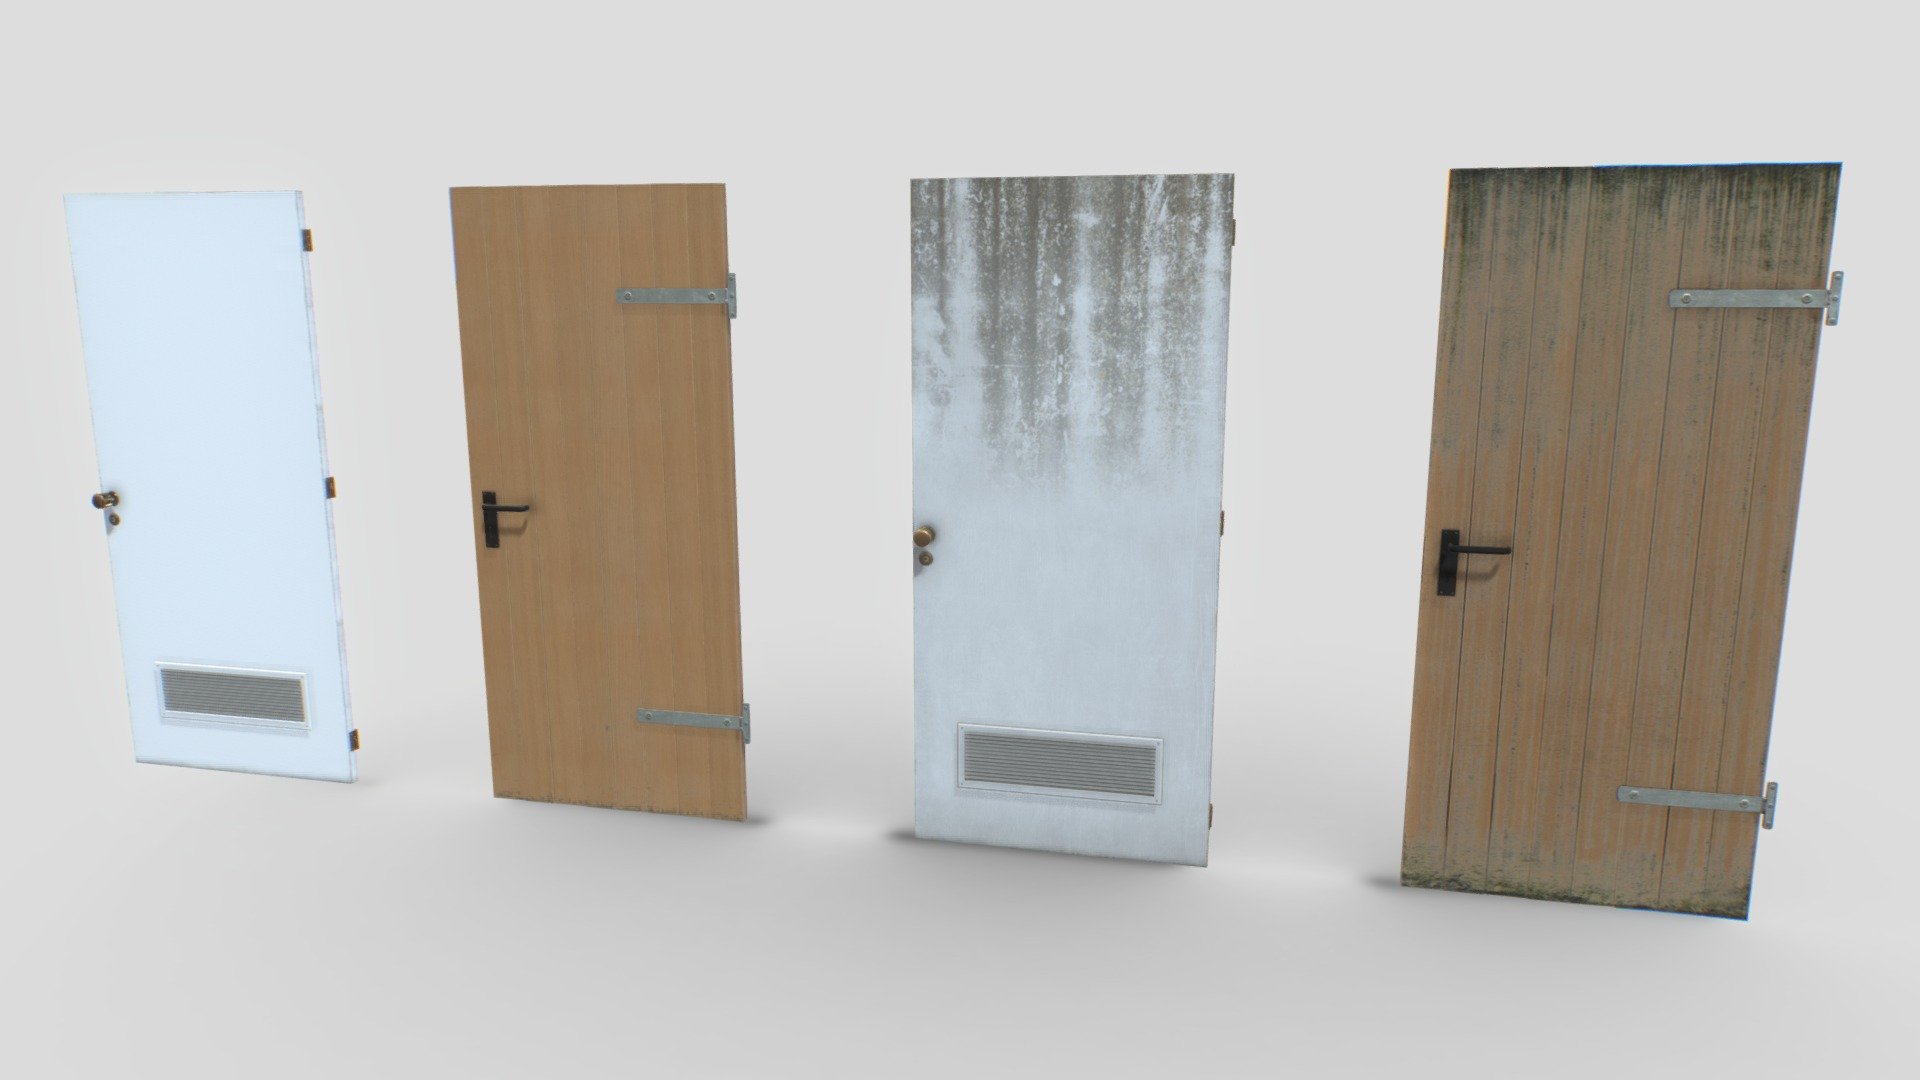 2 Basemment doors based in real ones. Real scale. Comes with 4096x PBR textures including Albedo, Normal, Metalness, Smoothness, Roughness and AO.

Model comes as a full object and in parts so you can animate it (hinges and handle). Also comes with 2 sets of textures, normal and another looking more old.

Door1: Total polys 2700. 1500 verts

Door2: Total polys 4000. 2200 verts - Basement Doors Pack 1 - Buy Royalty Free 3D model by 32cm 3d model